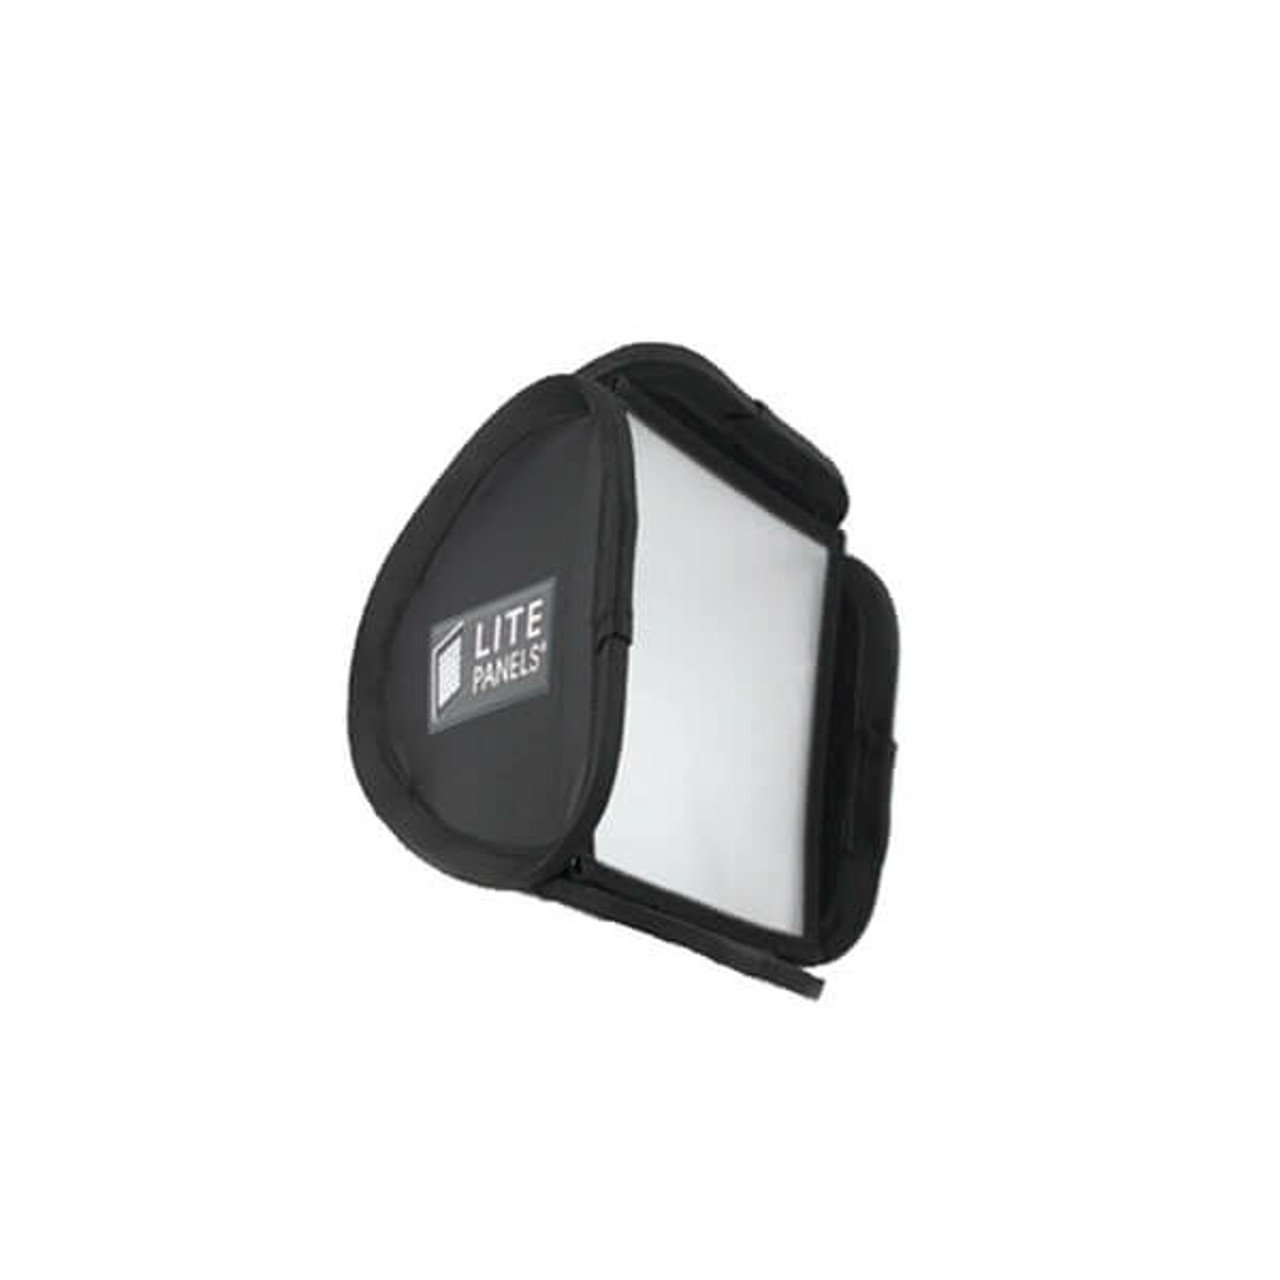 Litepanels 900-0023 Sola ENG Diffuser Filter For Softbox